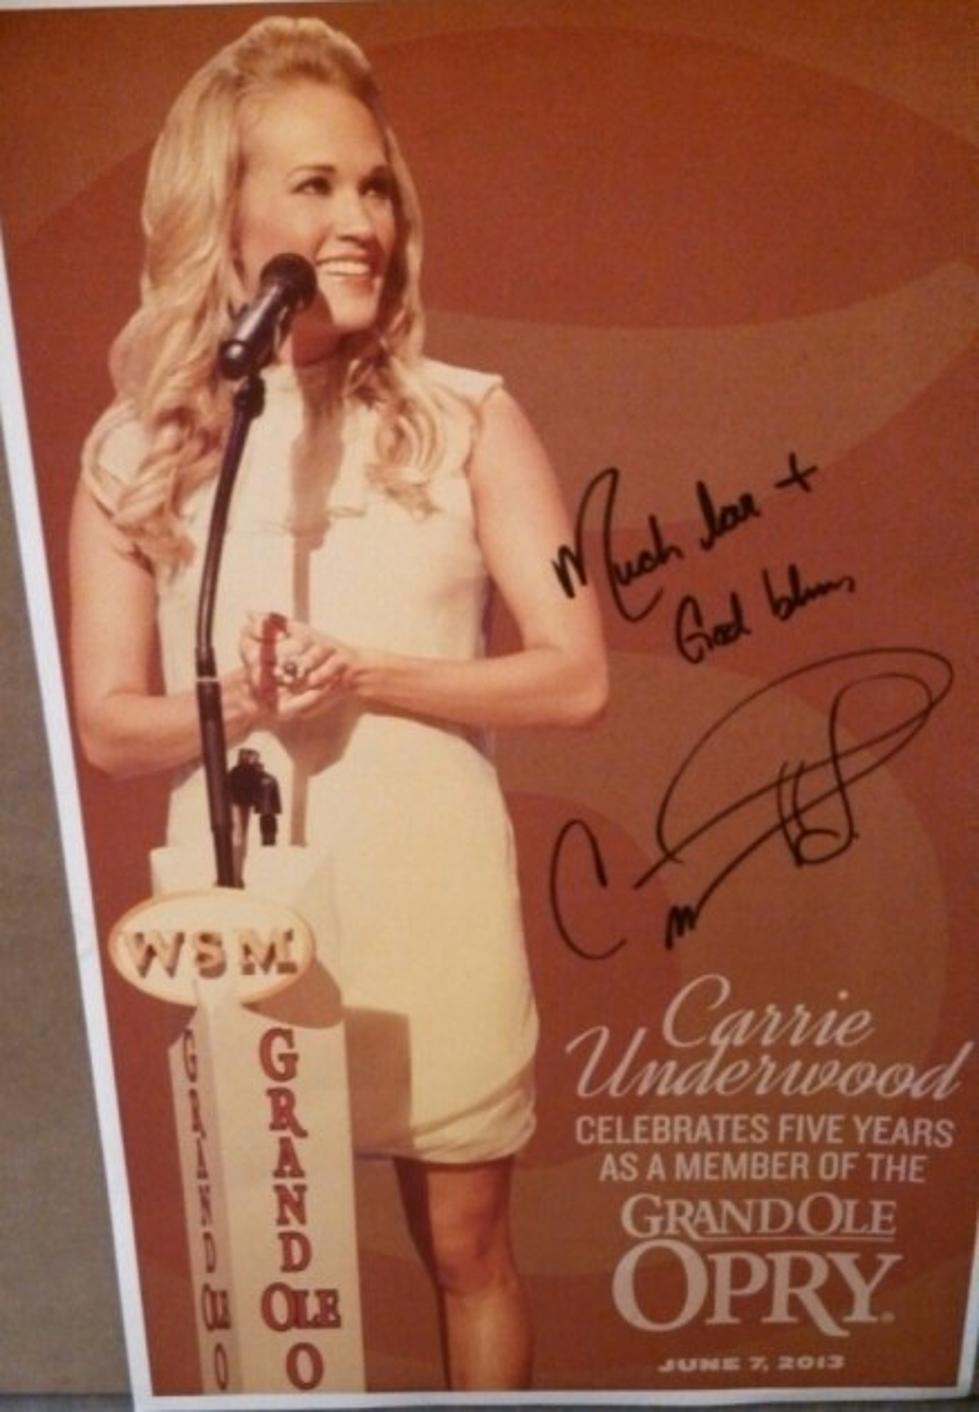 Bid On Autographed Carrie Underwood Poster For St. Jude